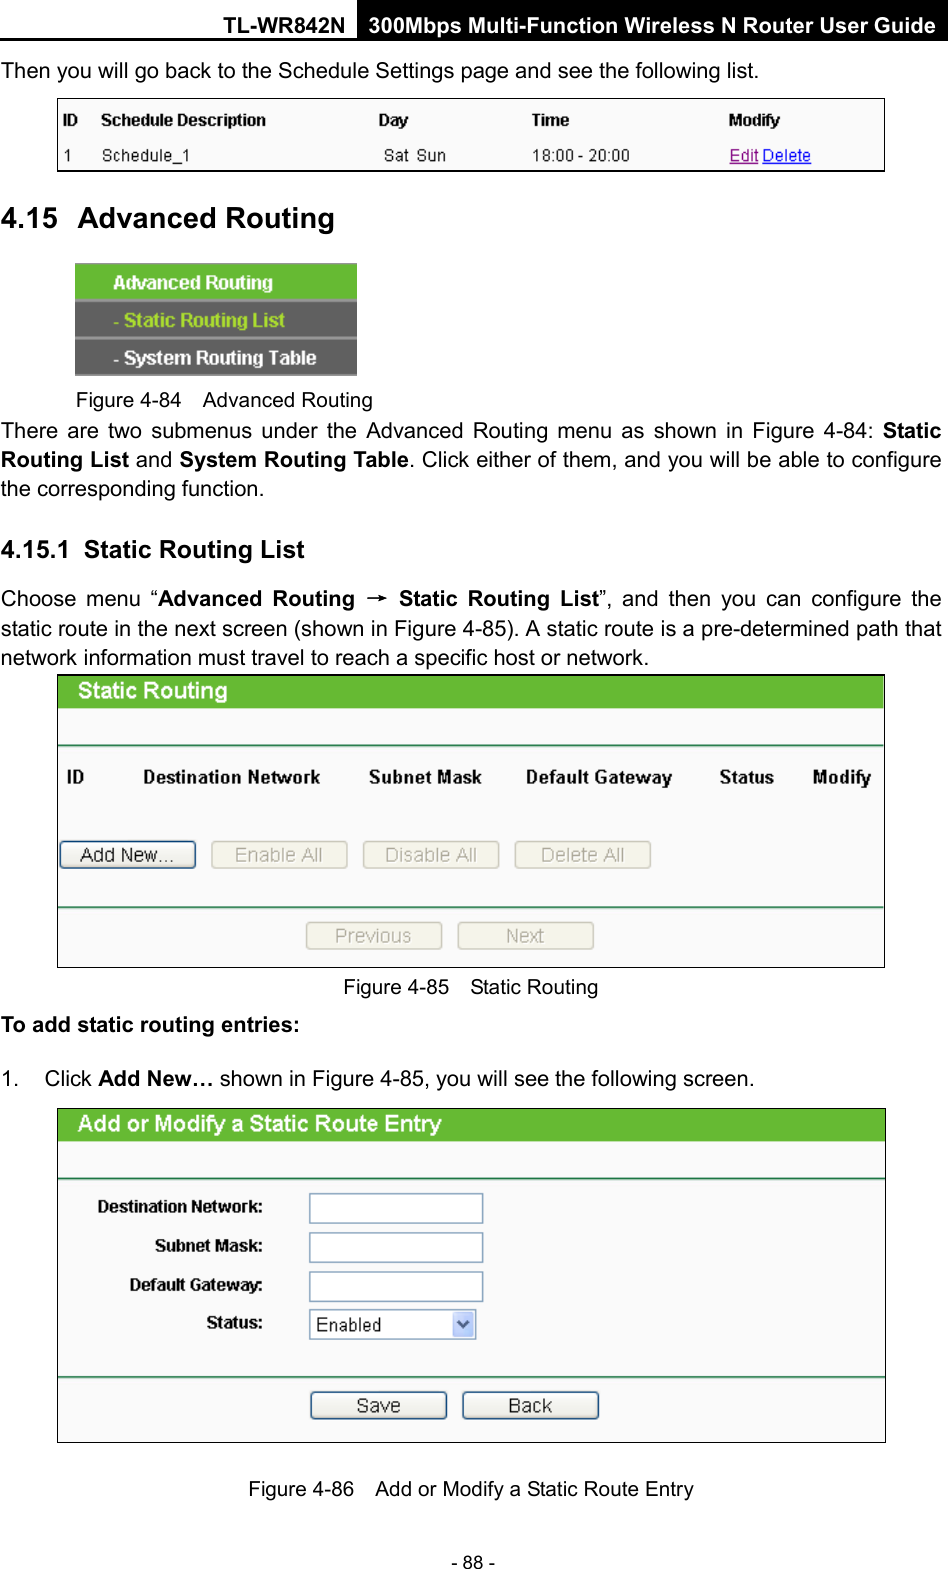 TL-WR842N 300Mbps Multi-Function Wireless N Router User Guide  - 88 - Then you will go back to the Schedule Settings page and see the following list.  4.15  Advanced Routing  Figure 4-84  Advanced Routing There are two submenus under the Advanced Routing menu as shown in Figure  4-84:  Static Routing List and System Routing Table. Click either of them, and you will be able to configure the corresponding function. 4.15.1 Static Routing List Choose menu “Advanced Routing → Static Routing List”,  and then you can configure the static route in the next screen (shown in Figure 4-85). A static route is a pre-determined path that network information must travel to reach a specific host or network.  Figure 4-85  Static Routing To add static routing entries: 1. Click Add New… shown in Figure 4-85, you will see the following screen.  Figure 4-86  Add or Modify a Static Route Entry 